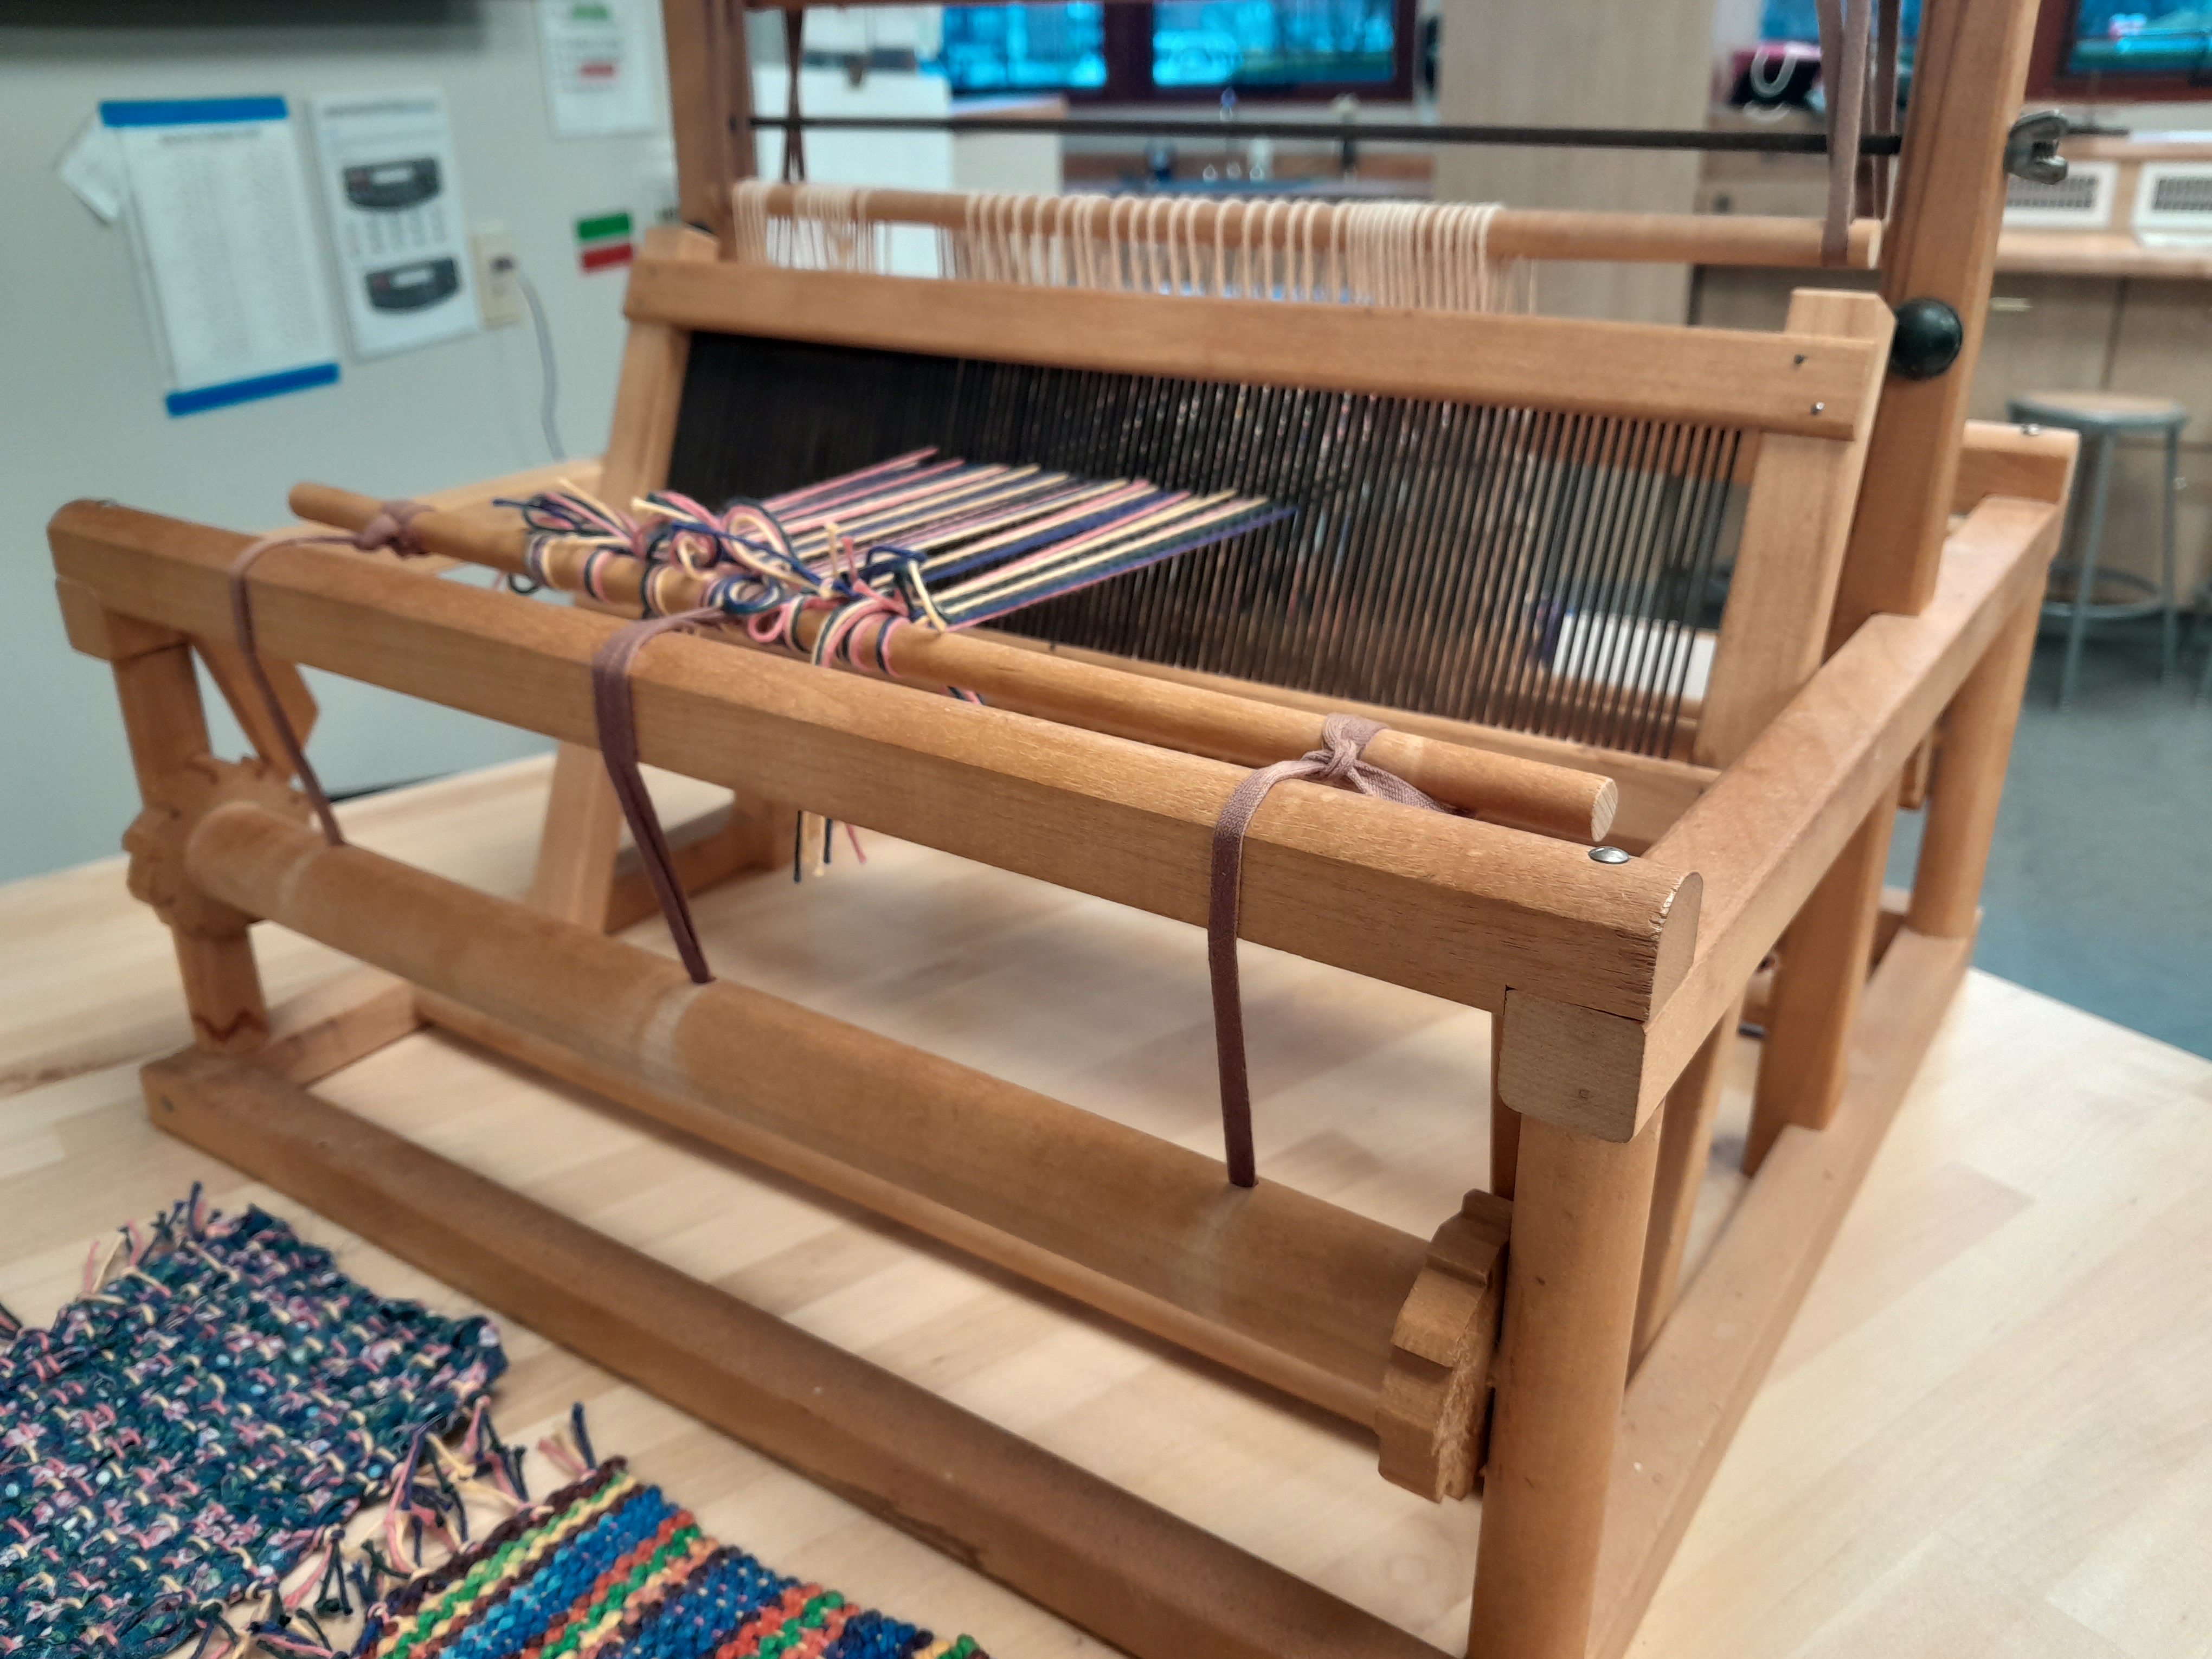 Photo of a table loom